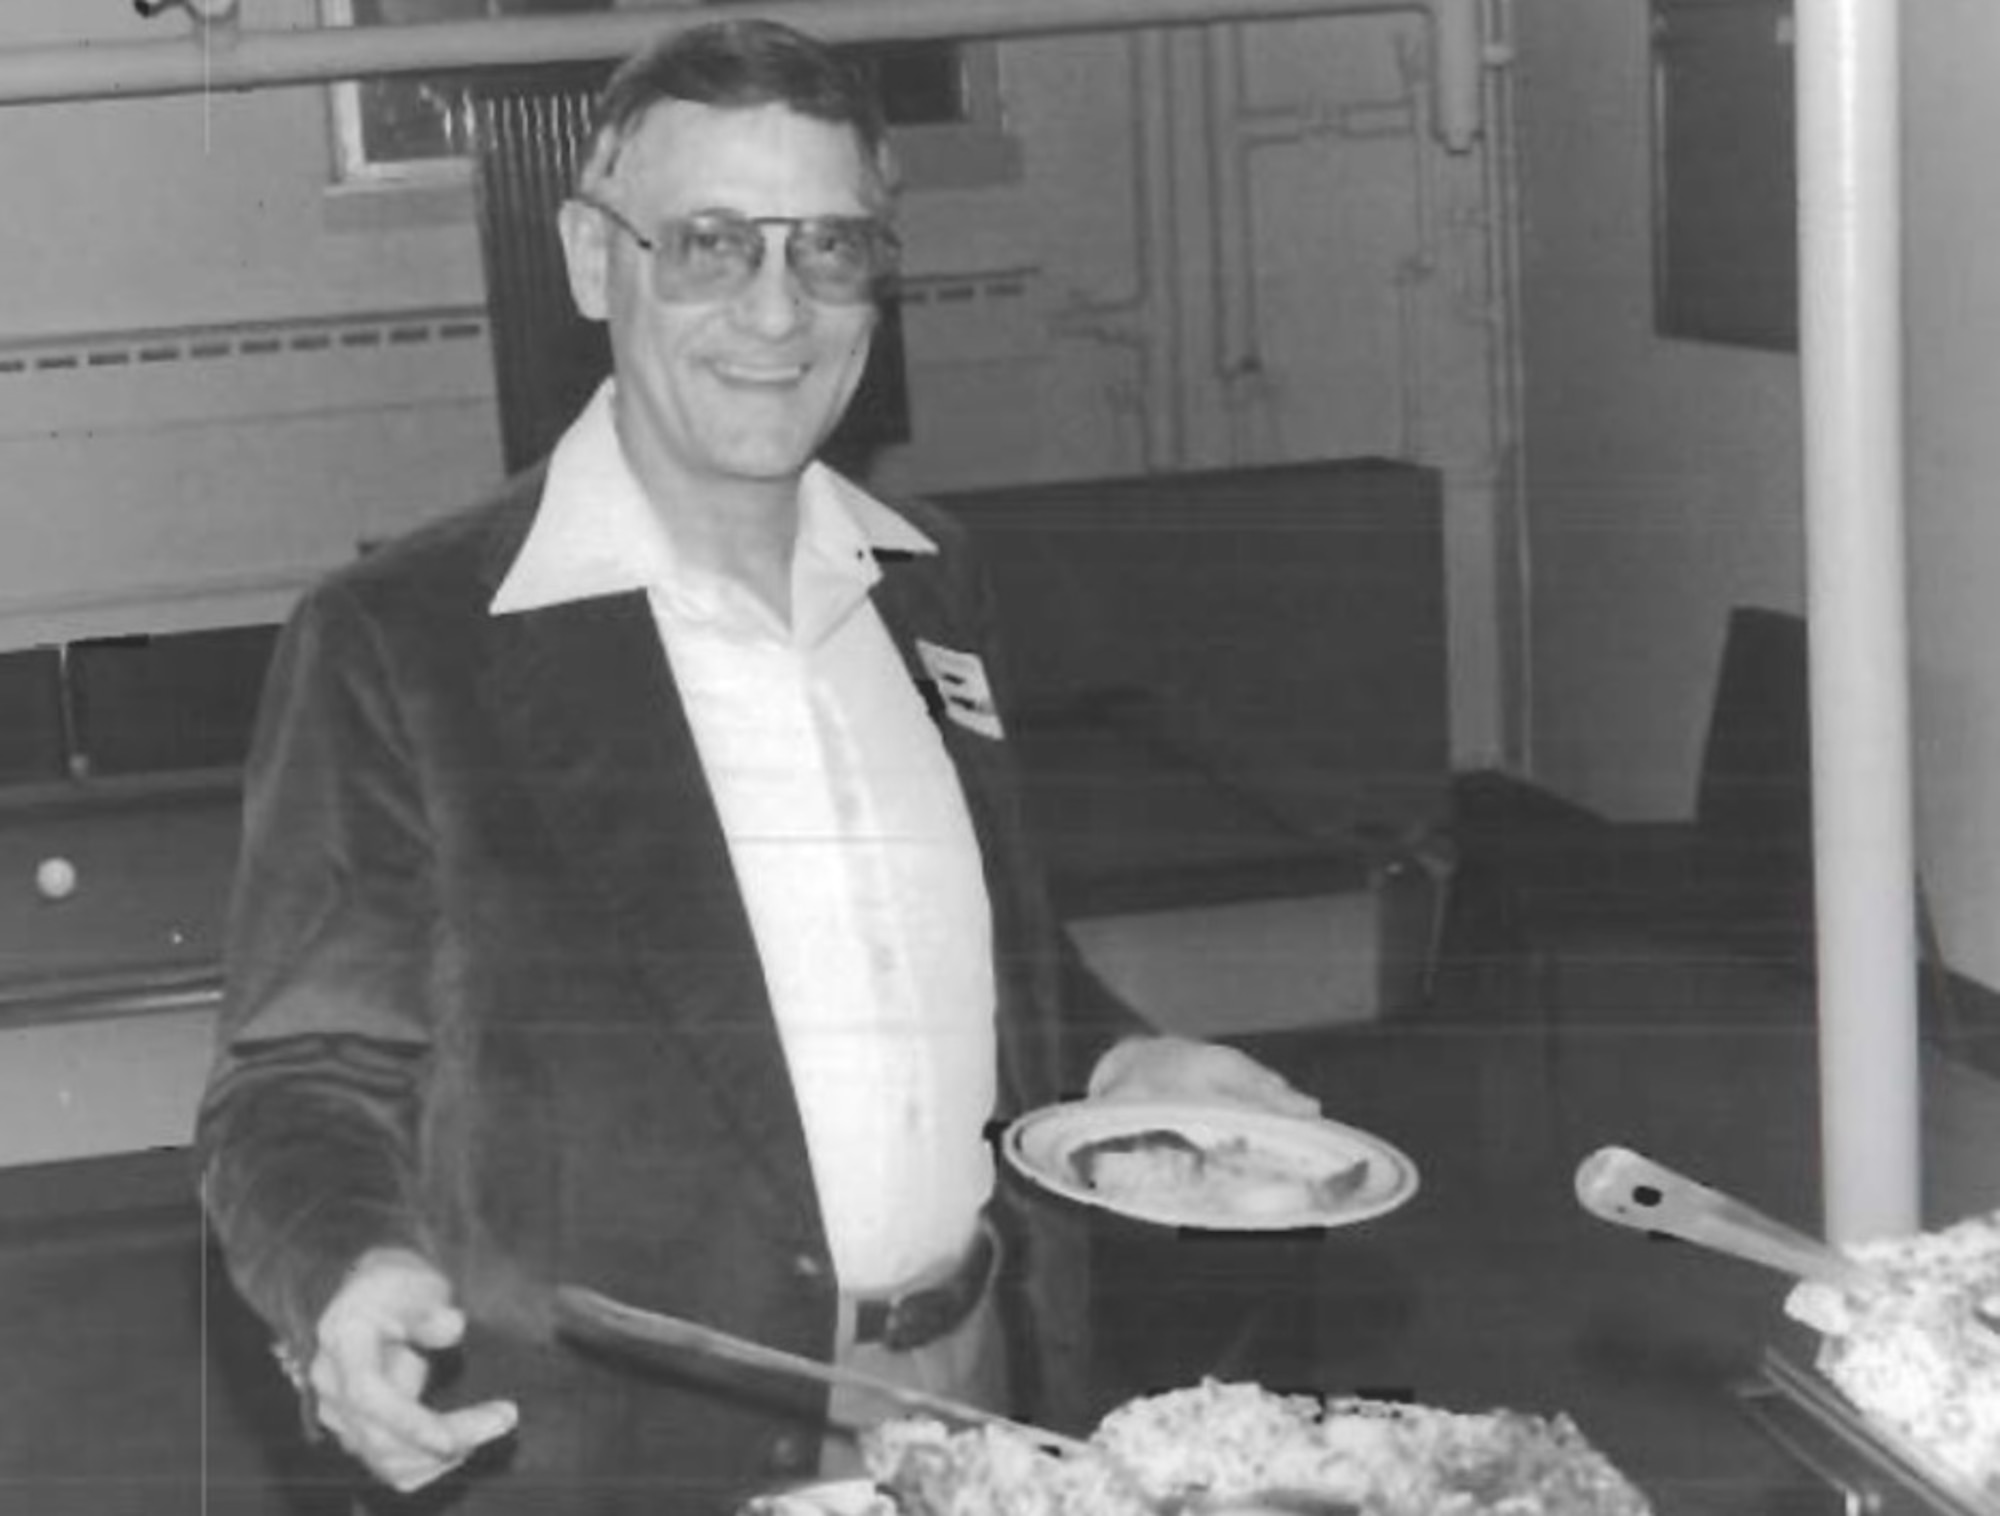 Col. Forest A. Singhoff, OSI Commander, leads the way through an “Alaskan Special Dinner” buffet during a visit to OSI District 81 at Elmendorf Air Force Base in 1978. (U.S. Air Force photo).